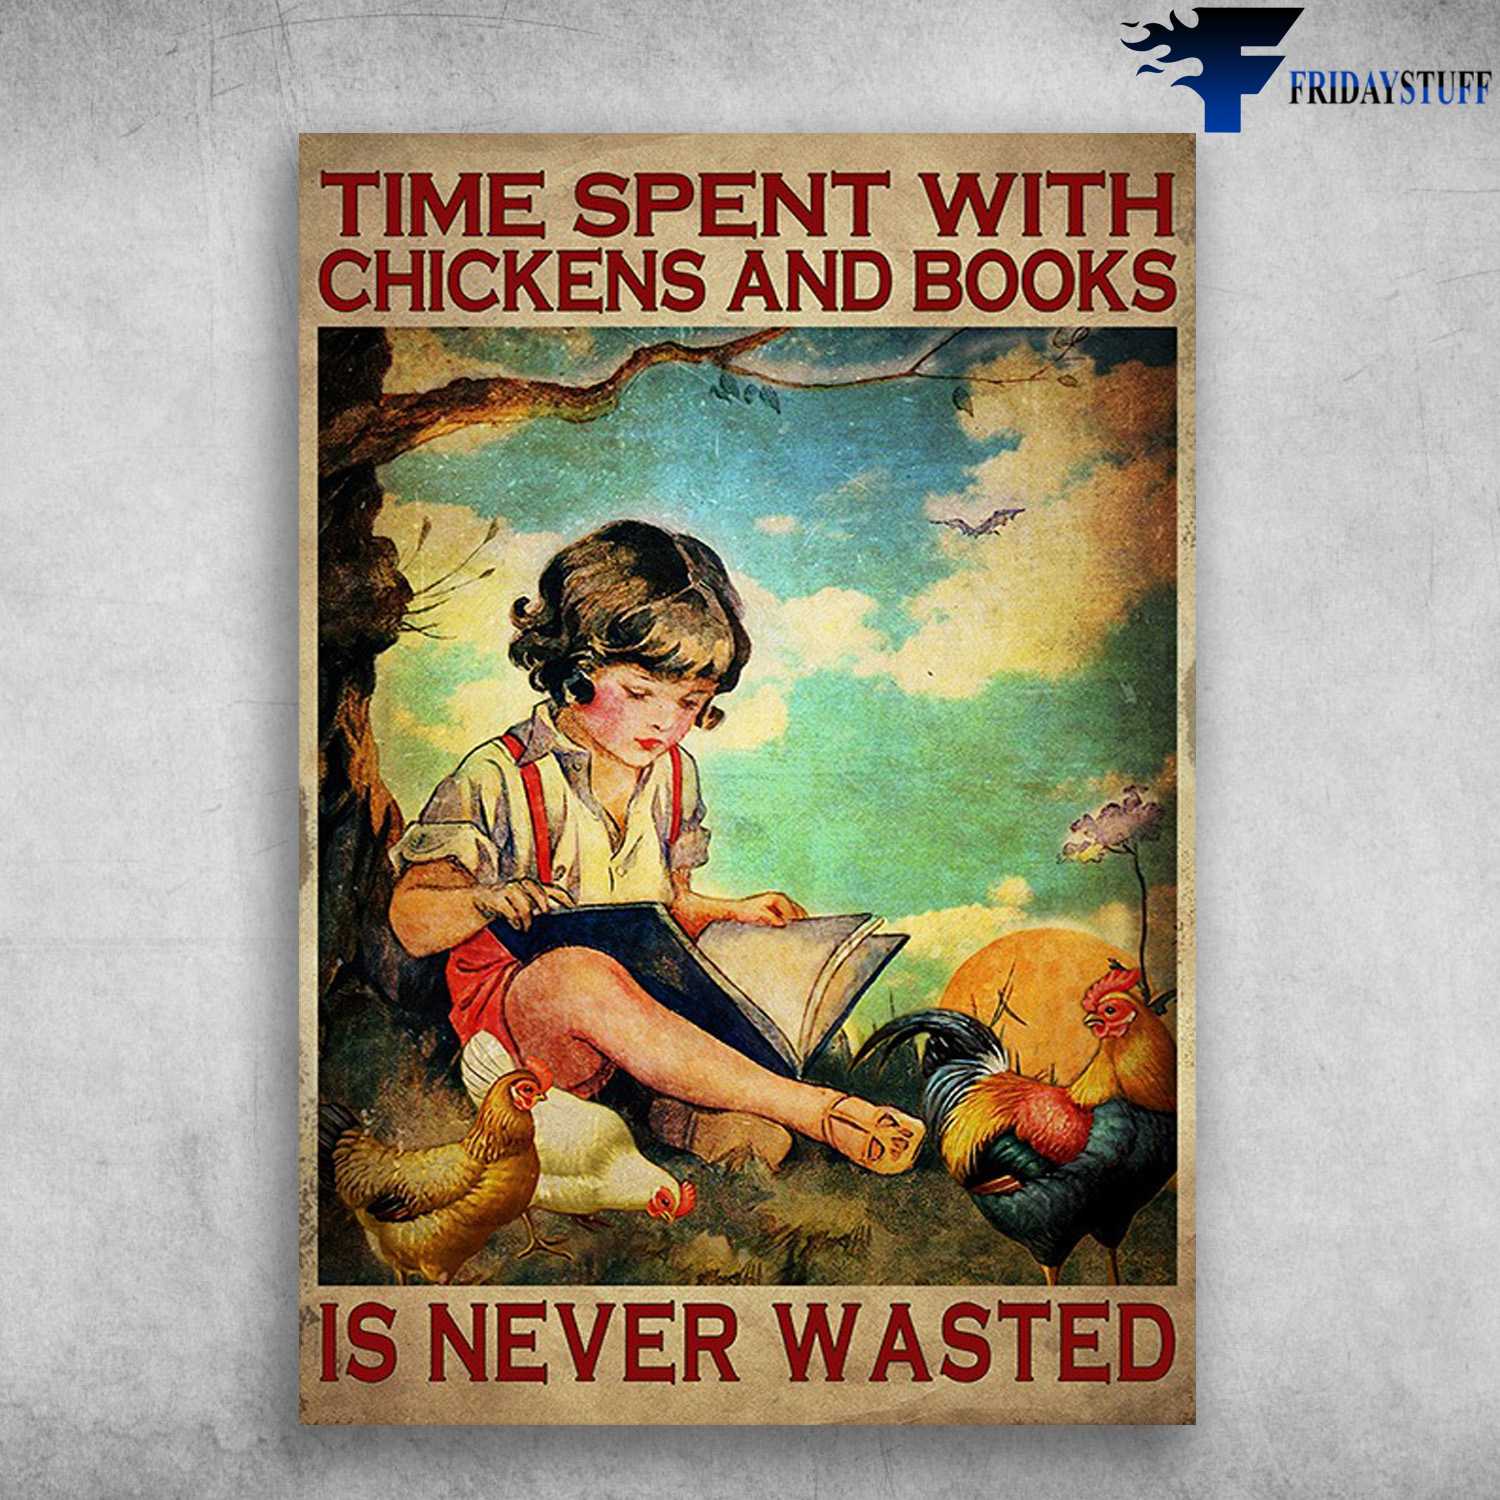 Books And Chickens - Time Spent With Chickens And Book, Is Never Wasted